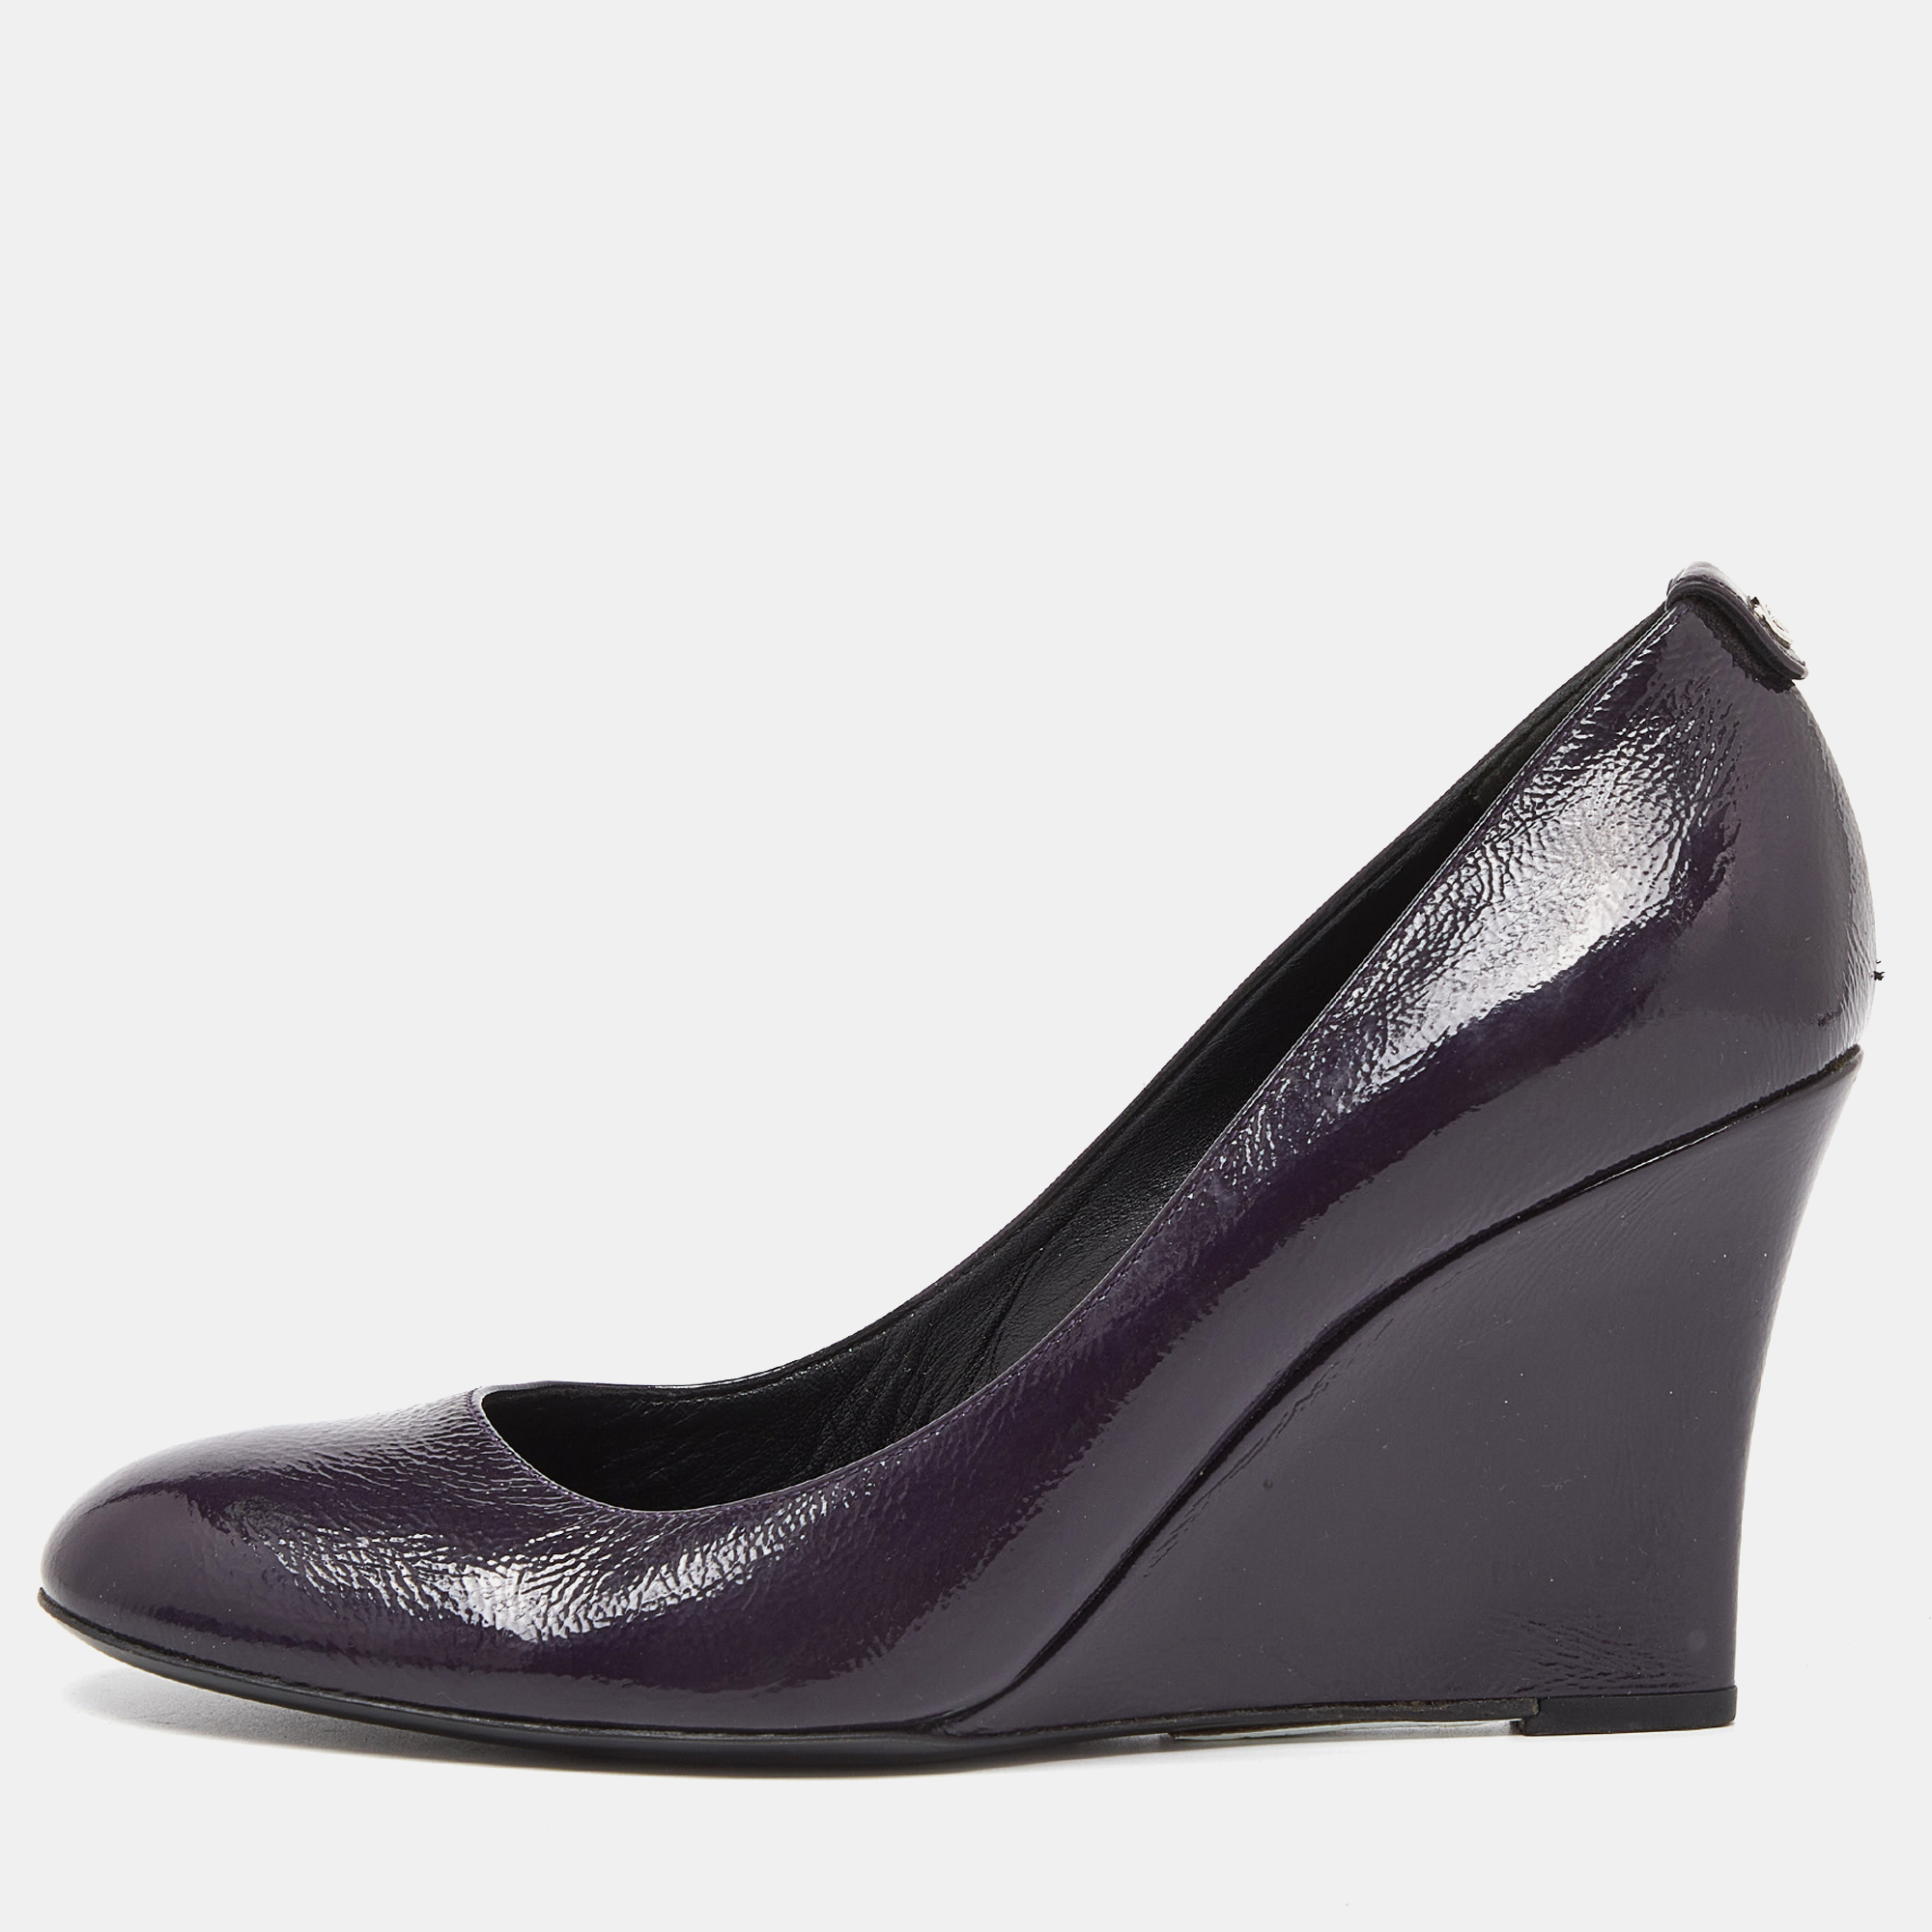 Gucci purple patent leather wedge pumps size 38